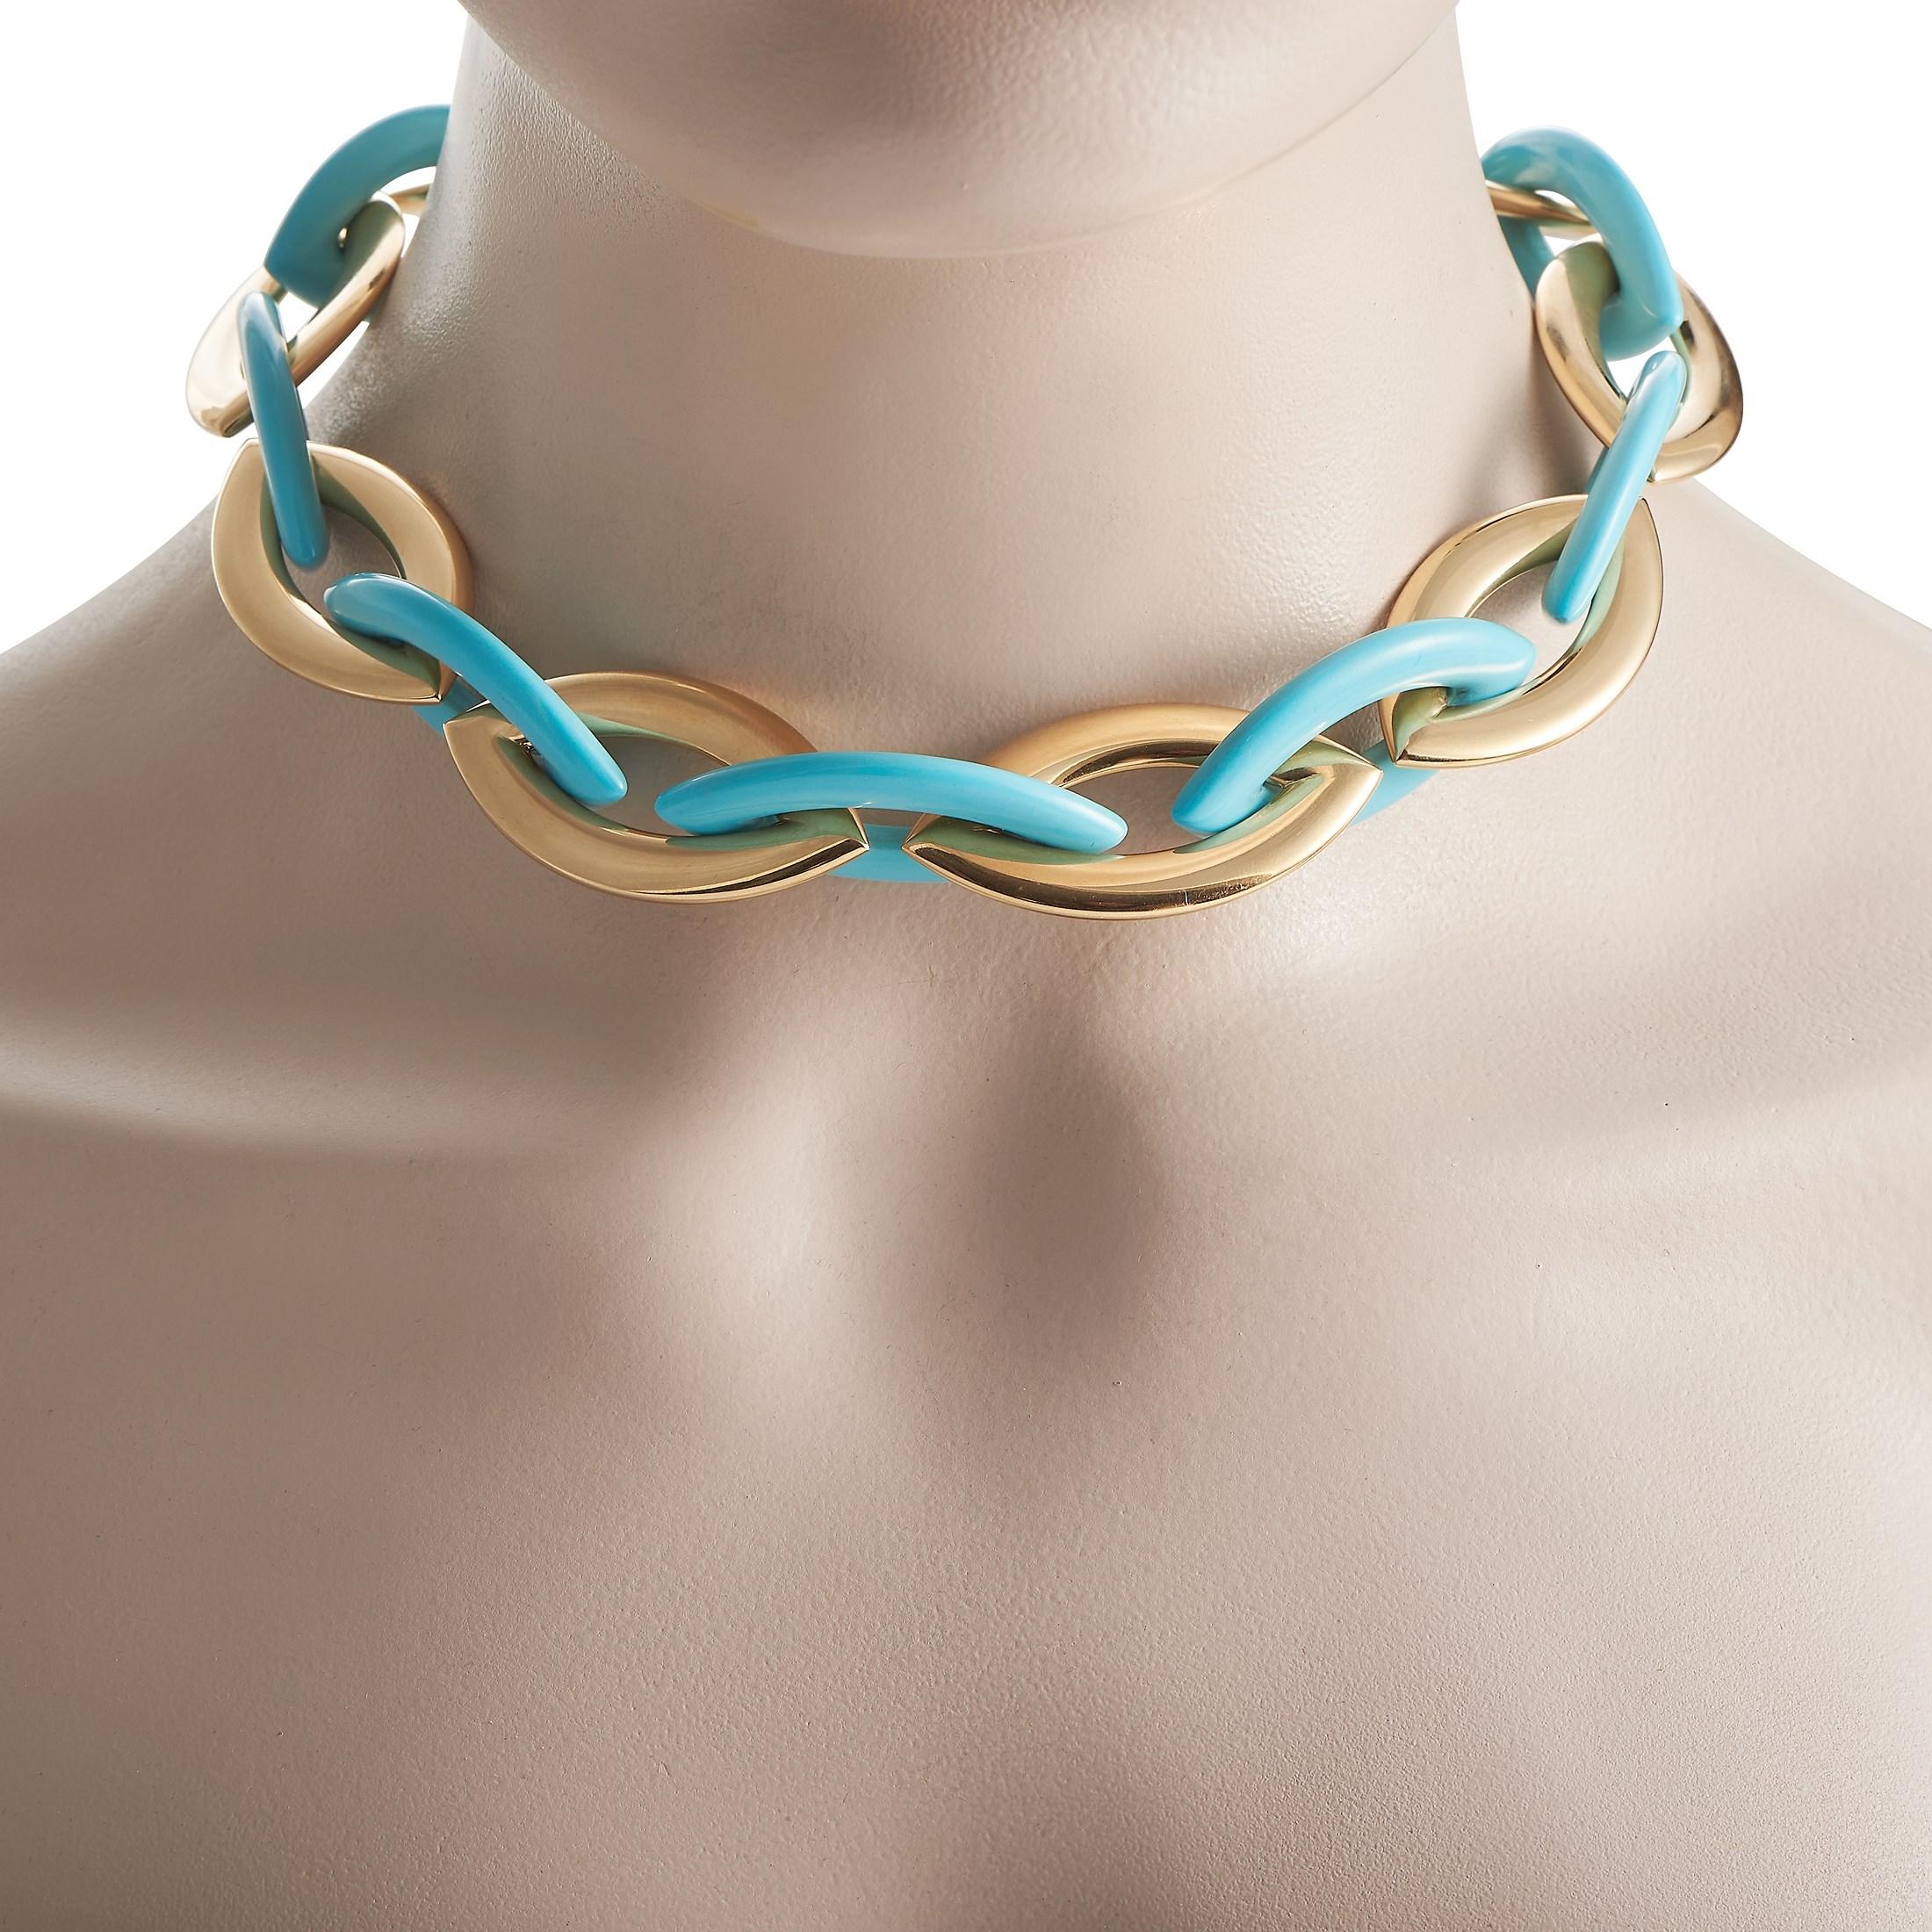 Add a bold pop of color to any ensemble by adding this luxurious Vhernier Doppio Senso collar necklace. Oblong links made from 18K Yellow Gold pair beautifully with bright turquoise links - the result is a stunning accessory that measures 18”